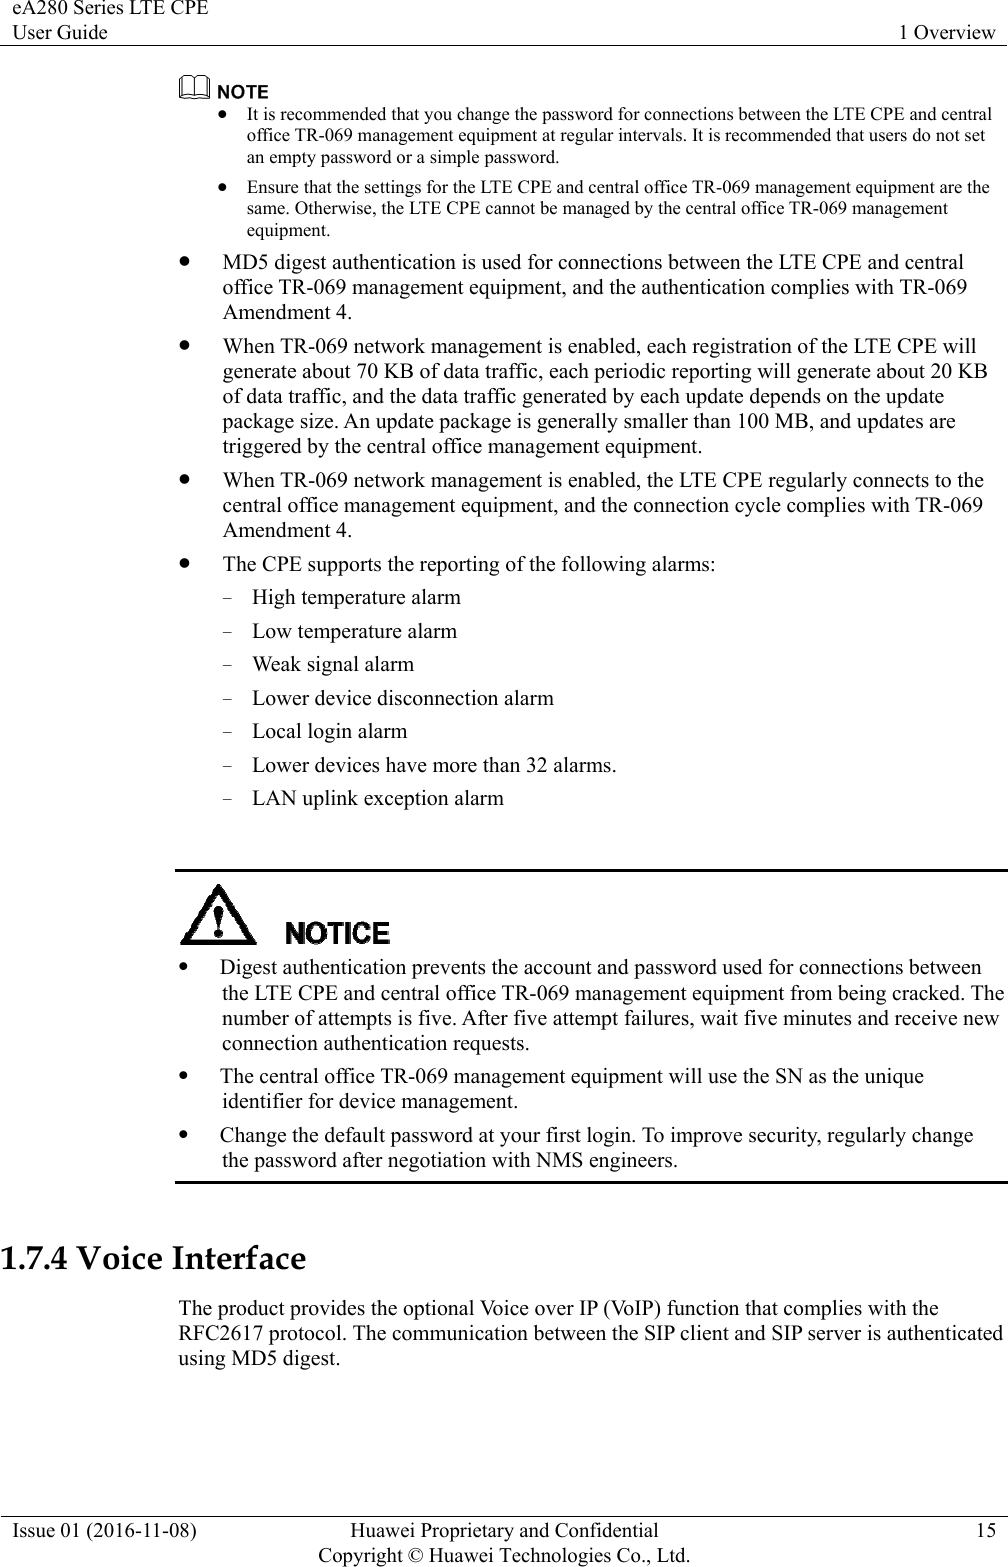 eA280 Series LTE CPE User Guide  1 Overview Issue 01 (2016-11-08)  Huawei Proprietary and Confidential         Copyright © Huawei Technologies Co., Ltd.15   It is recommended that you change the password for connections between the LTE CPE and central office TR-069 management equipment at regular intervals. It is recommended that users do not set an empty password or a simple password.  Ensure that the settings for the LTE CPE and central office TR-069 management equipment are the same. Otherwise, the LTE CPE cannot be managed by the central office TR-069 management equipment.  MD5 digest authentication is used for connections between the LTE CPE and central office TR-069 management equipment, and the authentication complies with TR-069 Amendment 4.  When TR-069 network management is enabled, each registration of the LTE CPE will generate about 70 KB of data traffic, each periodic reporting will generate about 20 KB of data traffic, and the data traffic generated by each update depends on the update package size. An update package is generally smaller than 100 MB, and updates are triggered by the central office management equipment.    When TR-069 network management is enabled, the LTE CPE regularly connects to the central office management equipment, and the connection cycle complies with TR-069 Amendment 4.  The CPE supports the reporting of the following alarms: − High temperature alarm − Low temperature alarm − Weak signal alarm − Lower device disconnection alarm − Local login alarm − Lower devices have more than 32 alarms. − LAN uplink exception alarm    Digest authentication prevents the account and password used for connections between the LTE CPE and central office TR-069 management equipment from being cracked. The number of attempts is five. After five attempt failures, wait five minutes and receive new connection authentication requests.  The central office TR-069 management equipment will use the SN as the unique identifier for device management.  Change the default password at your first login. To improve security, regularly change the password after negotiation with NMS engineers.  1.7.4 Voice Interface The product provides the optional Voice over IP (VoIP) function that complies with the RFC2617 protocol. The communication between the SIP client and SIP server is authenticated using MD5 digest.  